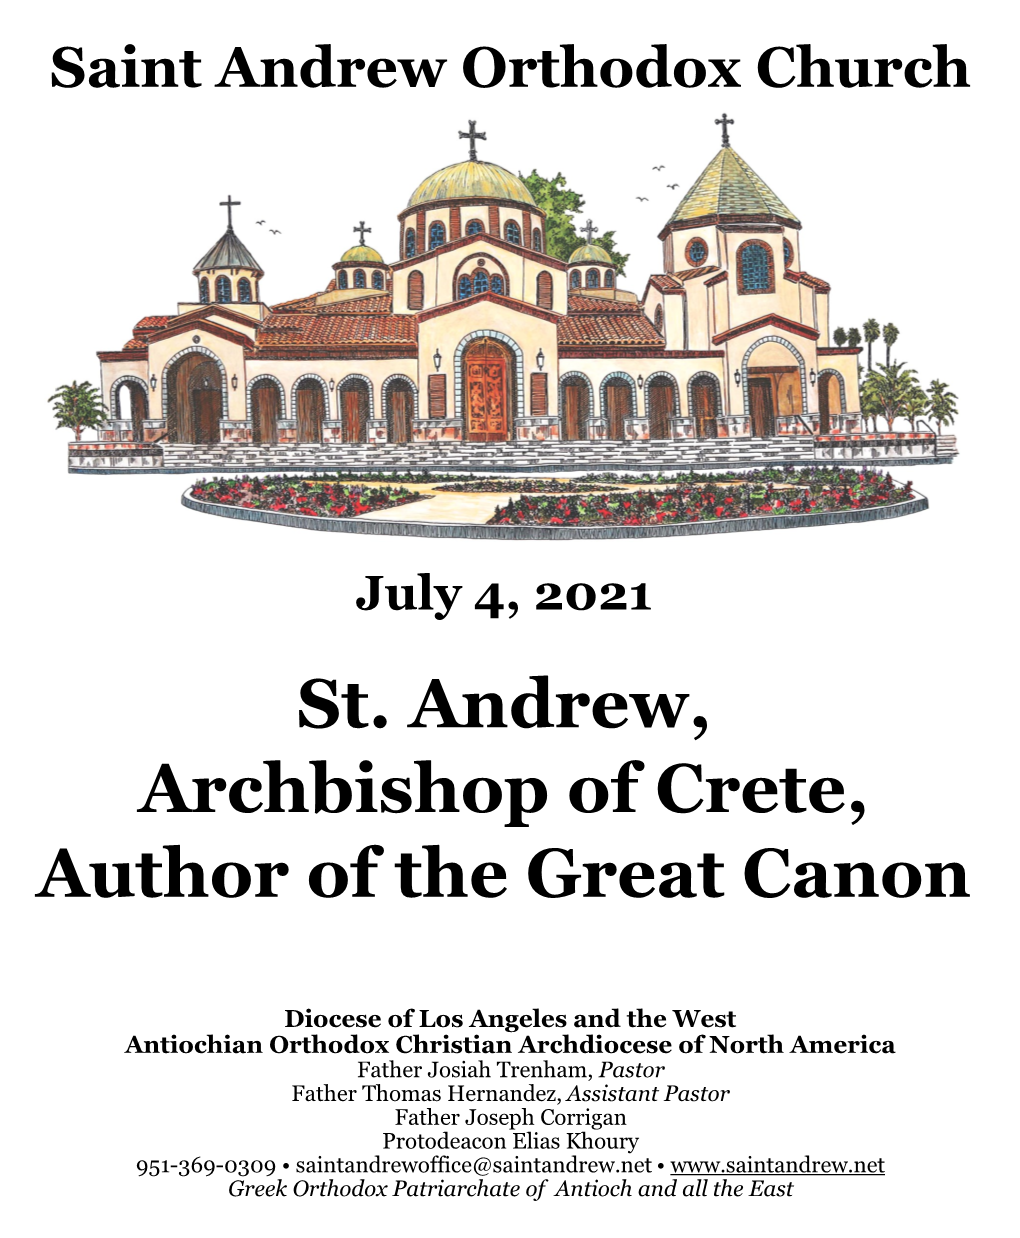 St. Andrew, Archbishop of Crete, Author of the Great Canon